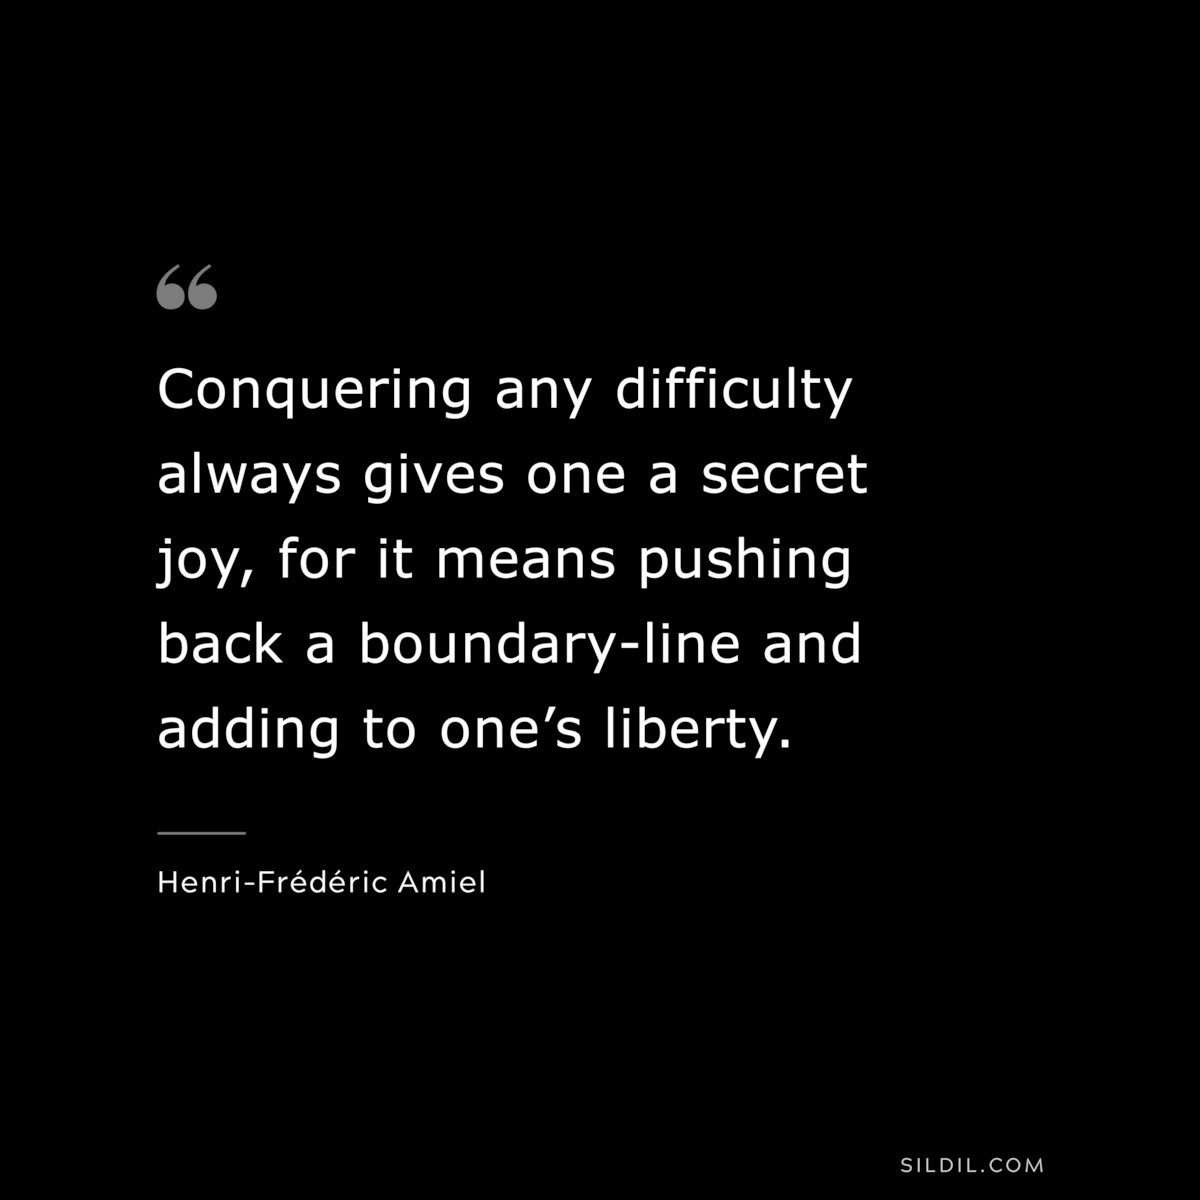 Conquering any difficulty always gives one a secret joy, for it means pushing back a boundary-line and adding to one’s liberty. ― Henri-Frédéric Amiel